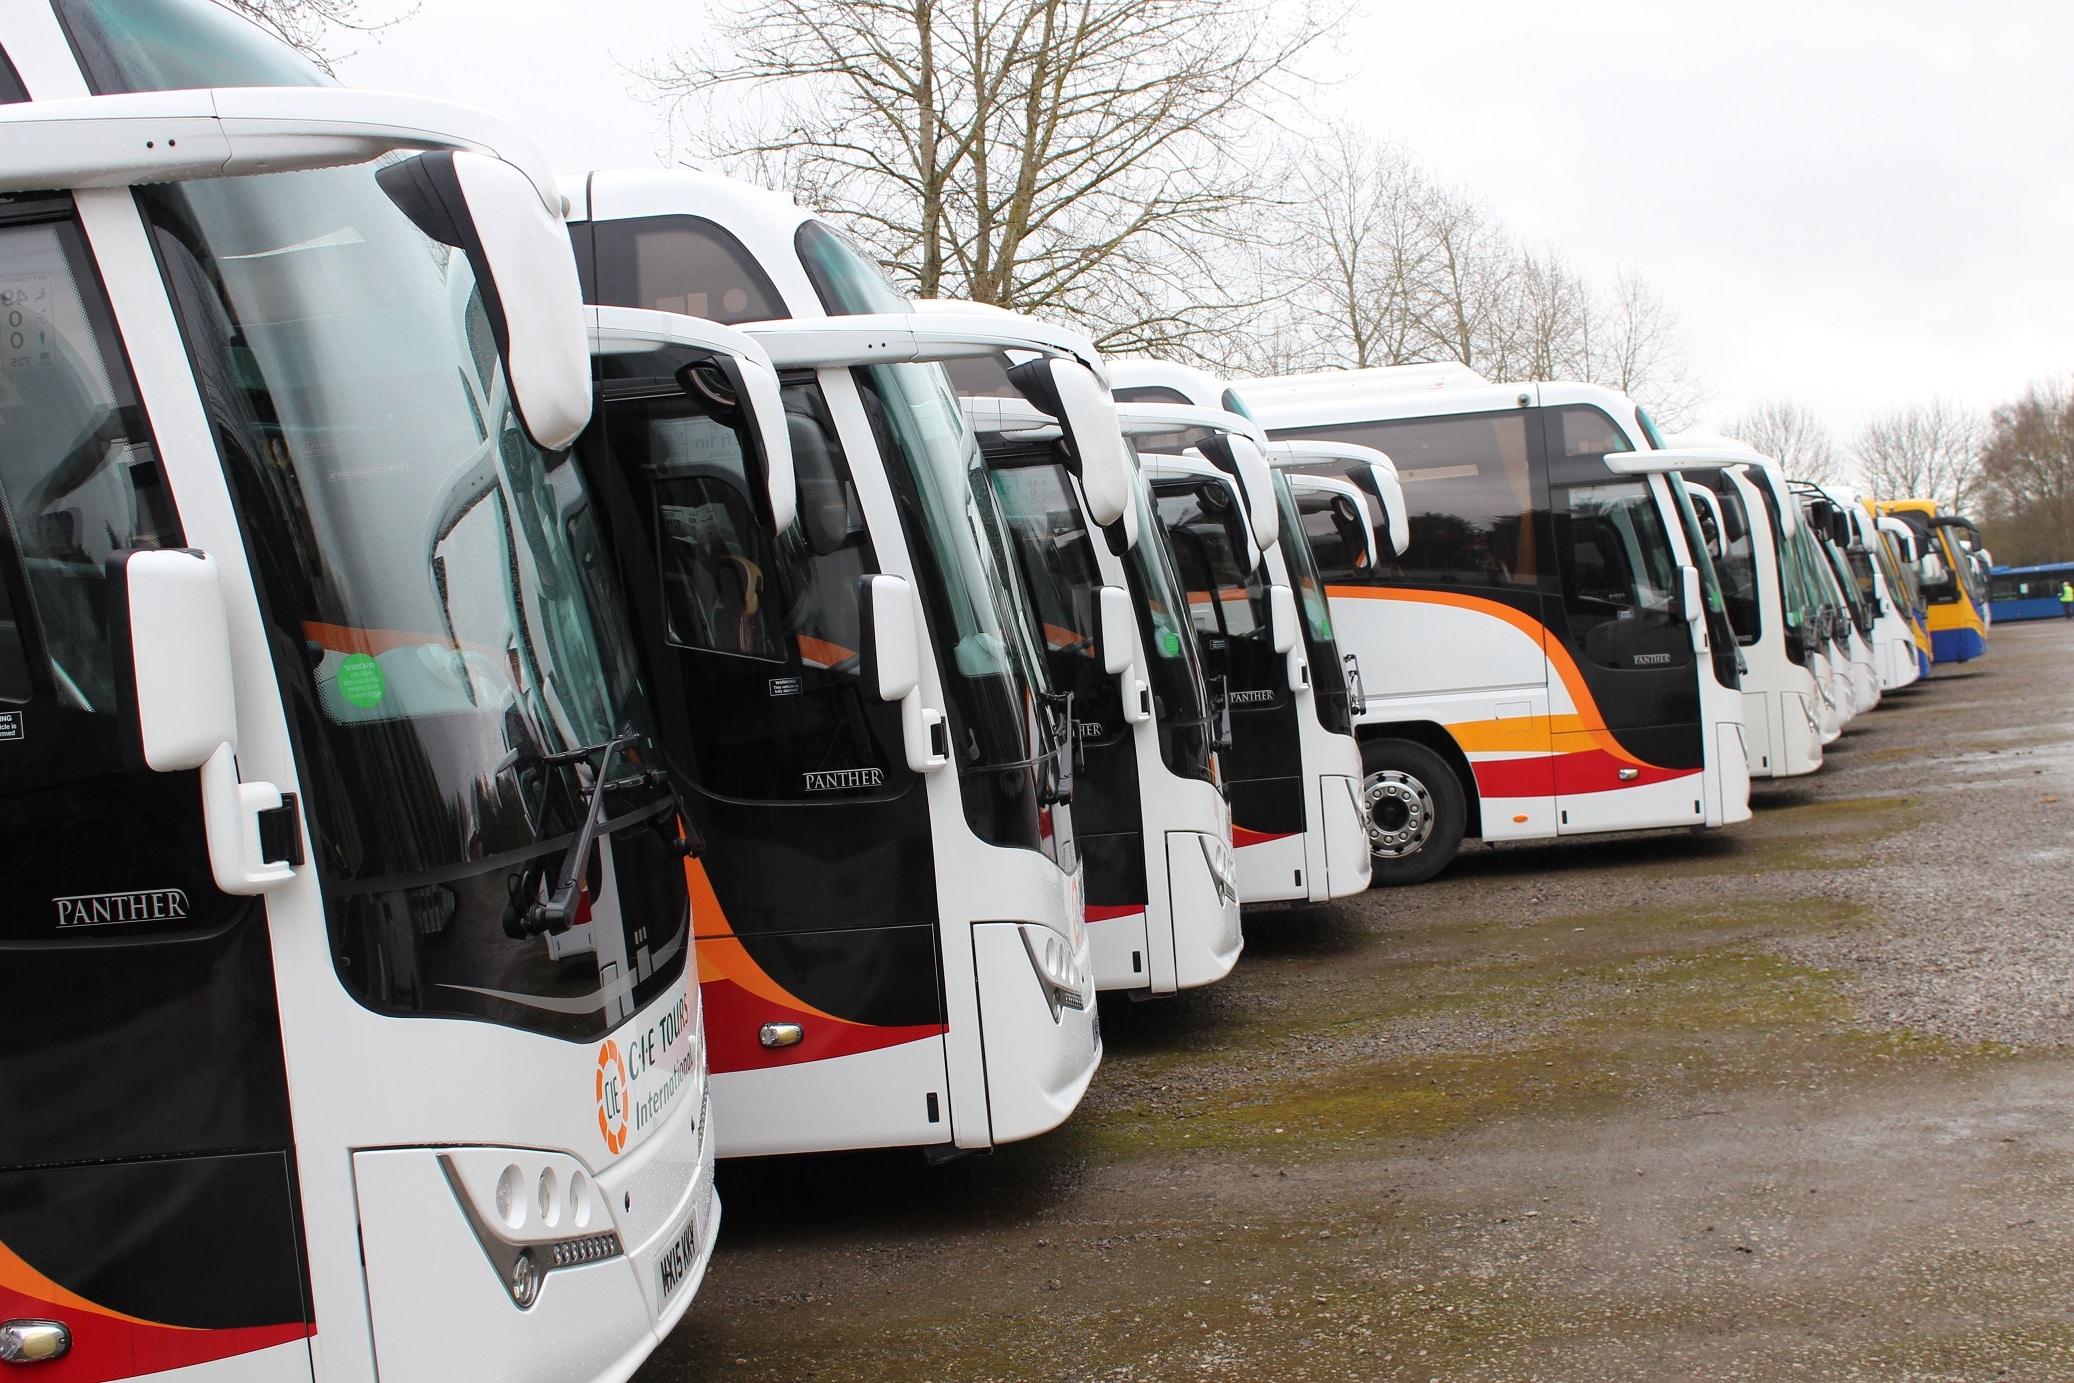 Coach operators reminded to consider exit plan - and weddings